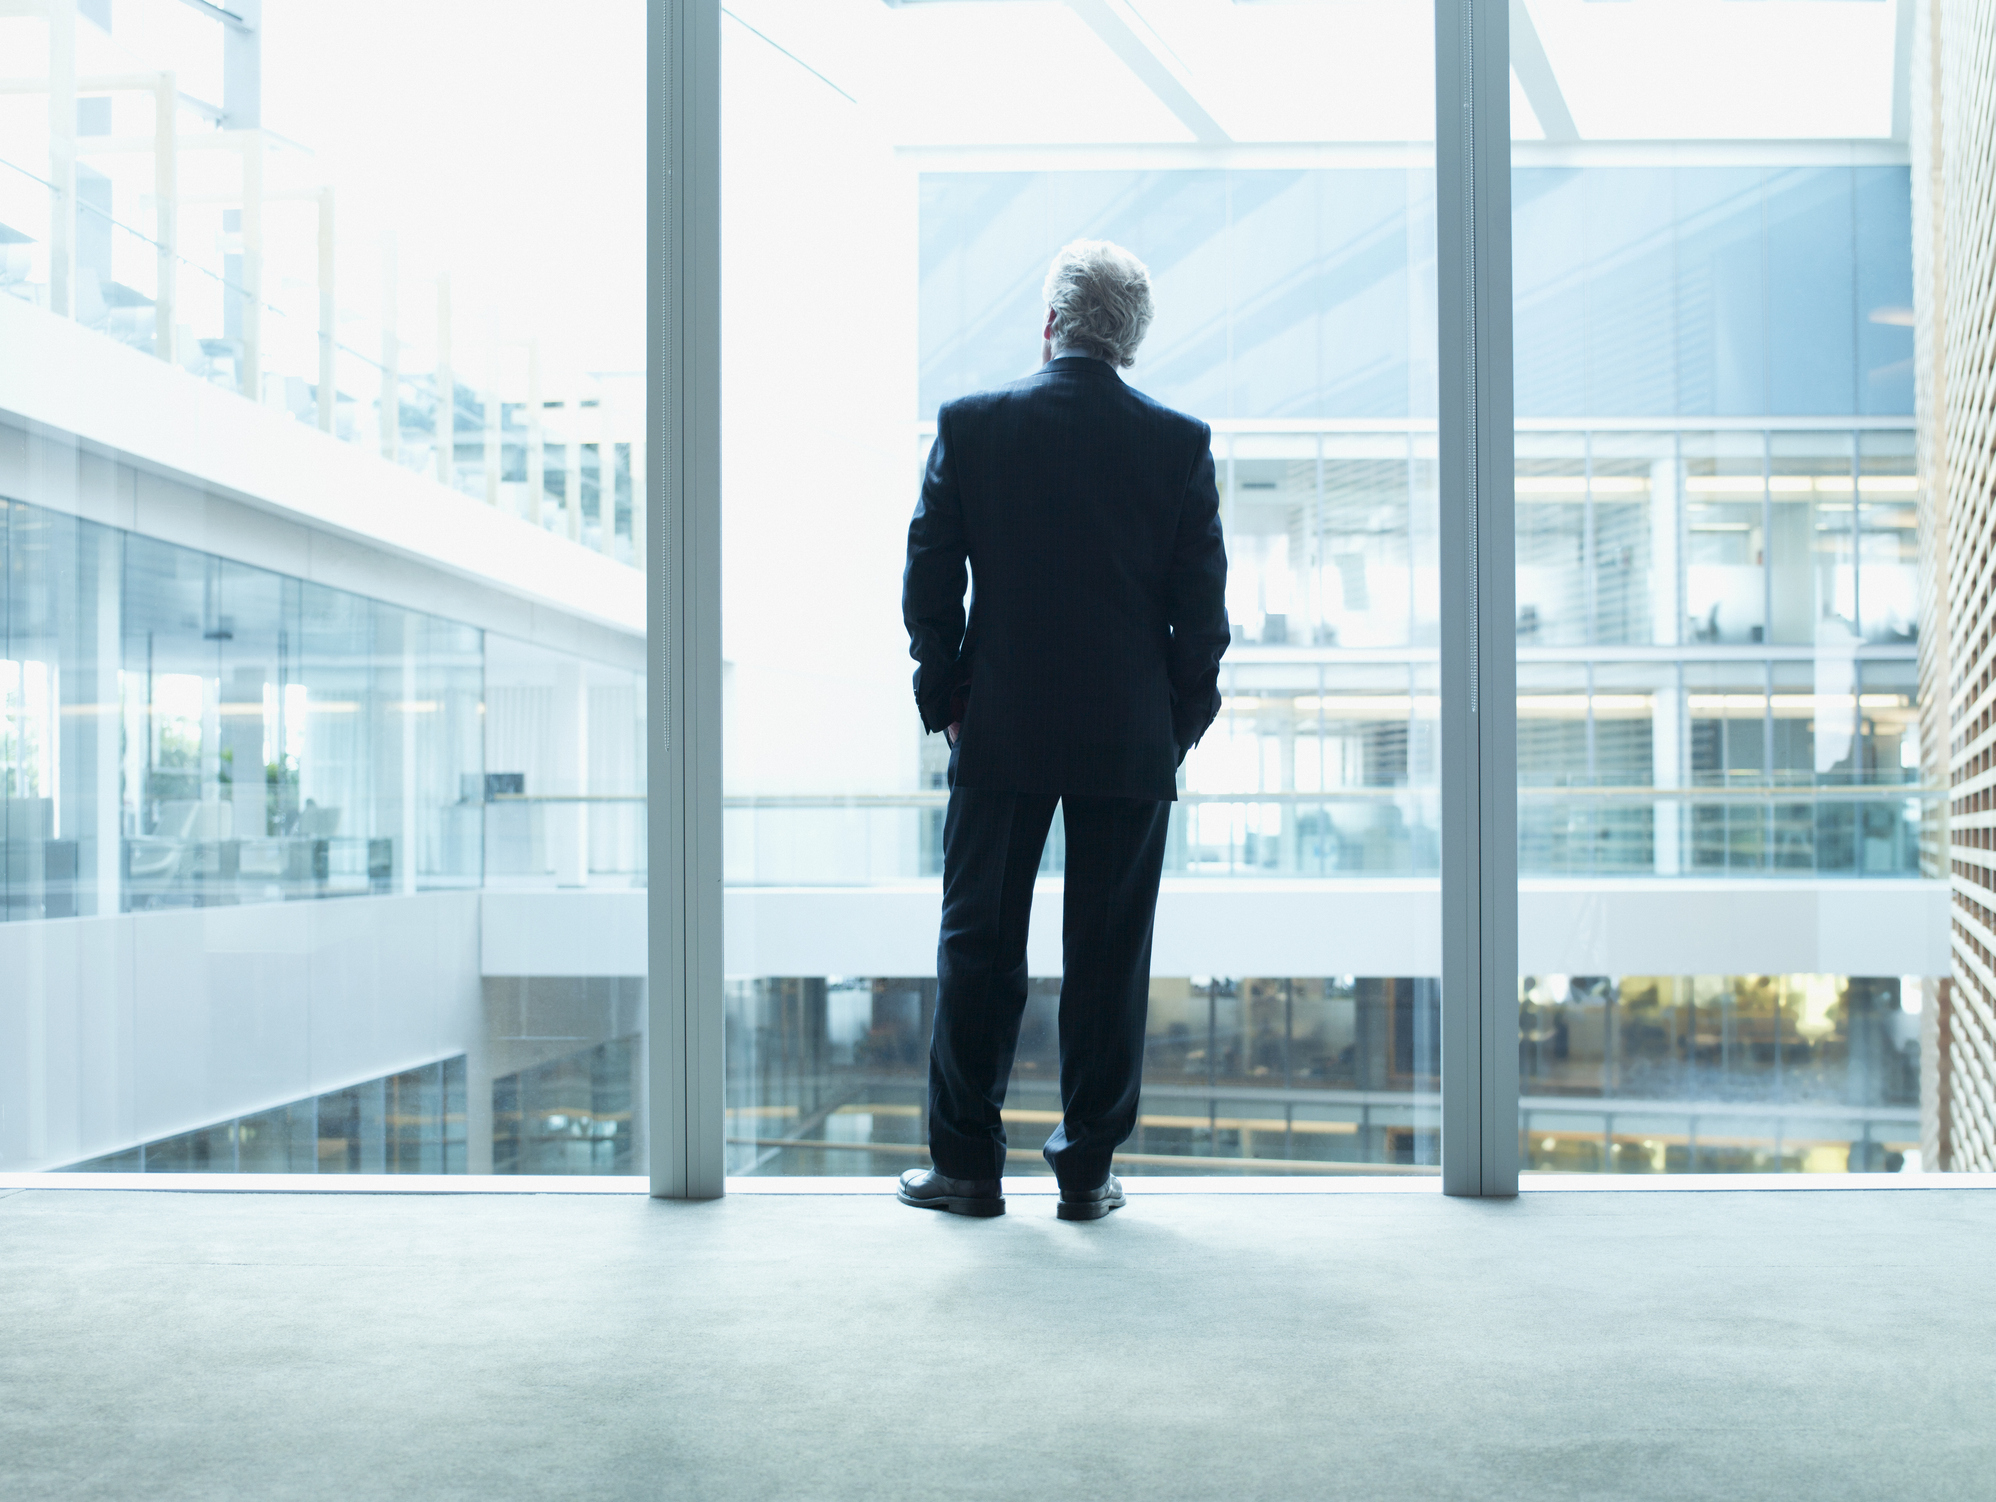 Person in business attire viewed from behind looking out of a large window in an office building